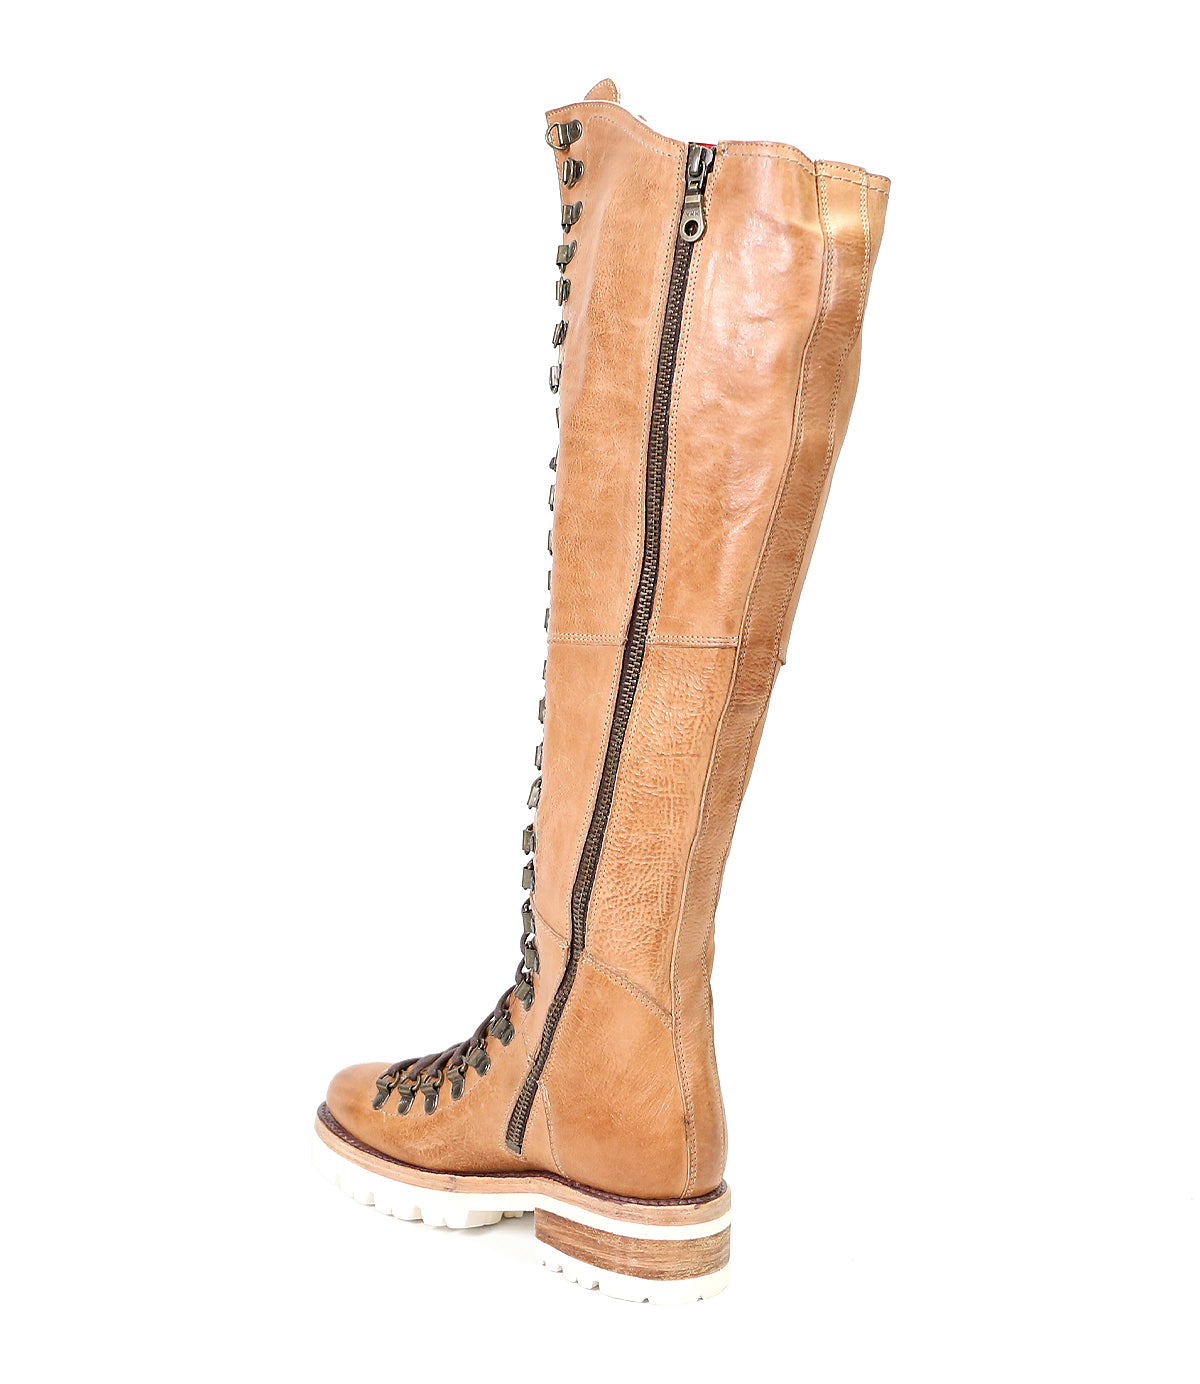 A tall, light brown leather-lined boot with laces and a zipper on a white background by Bed Stu's Lustrous.